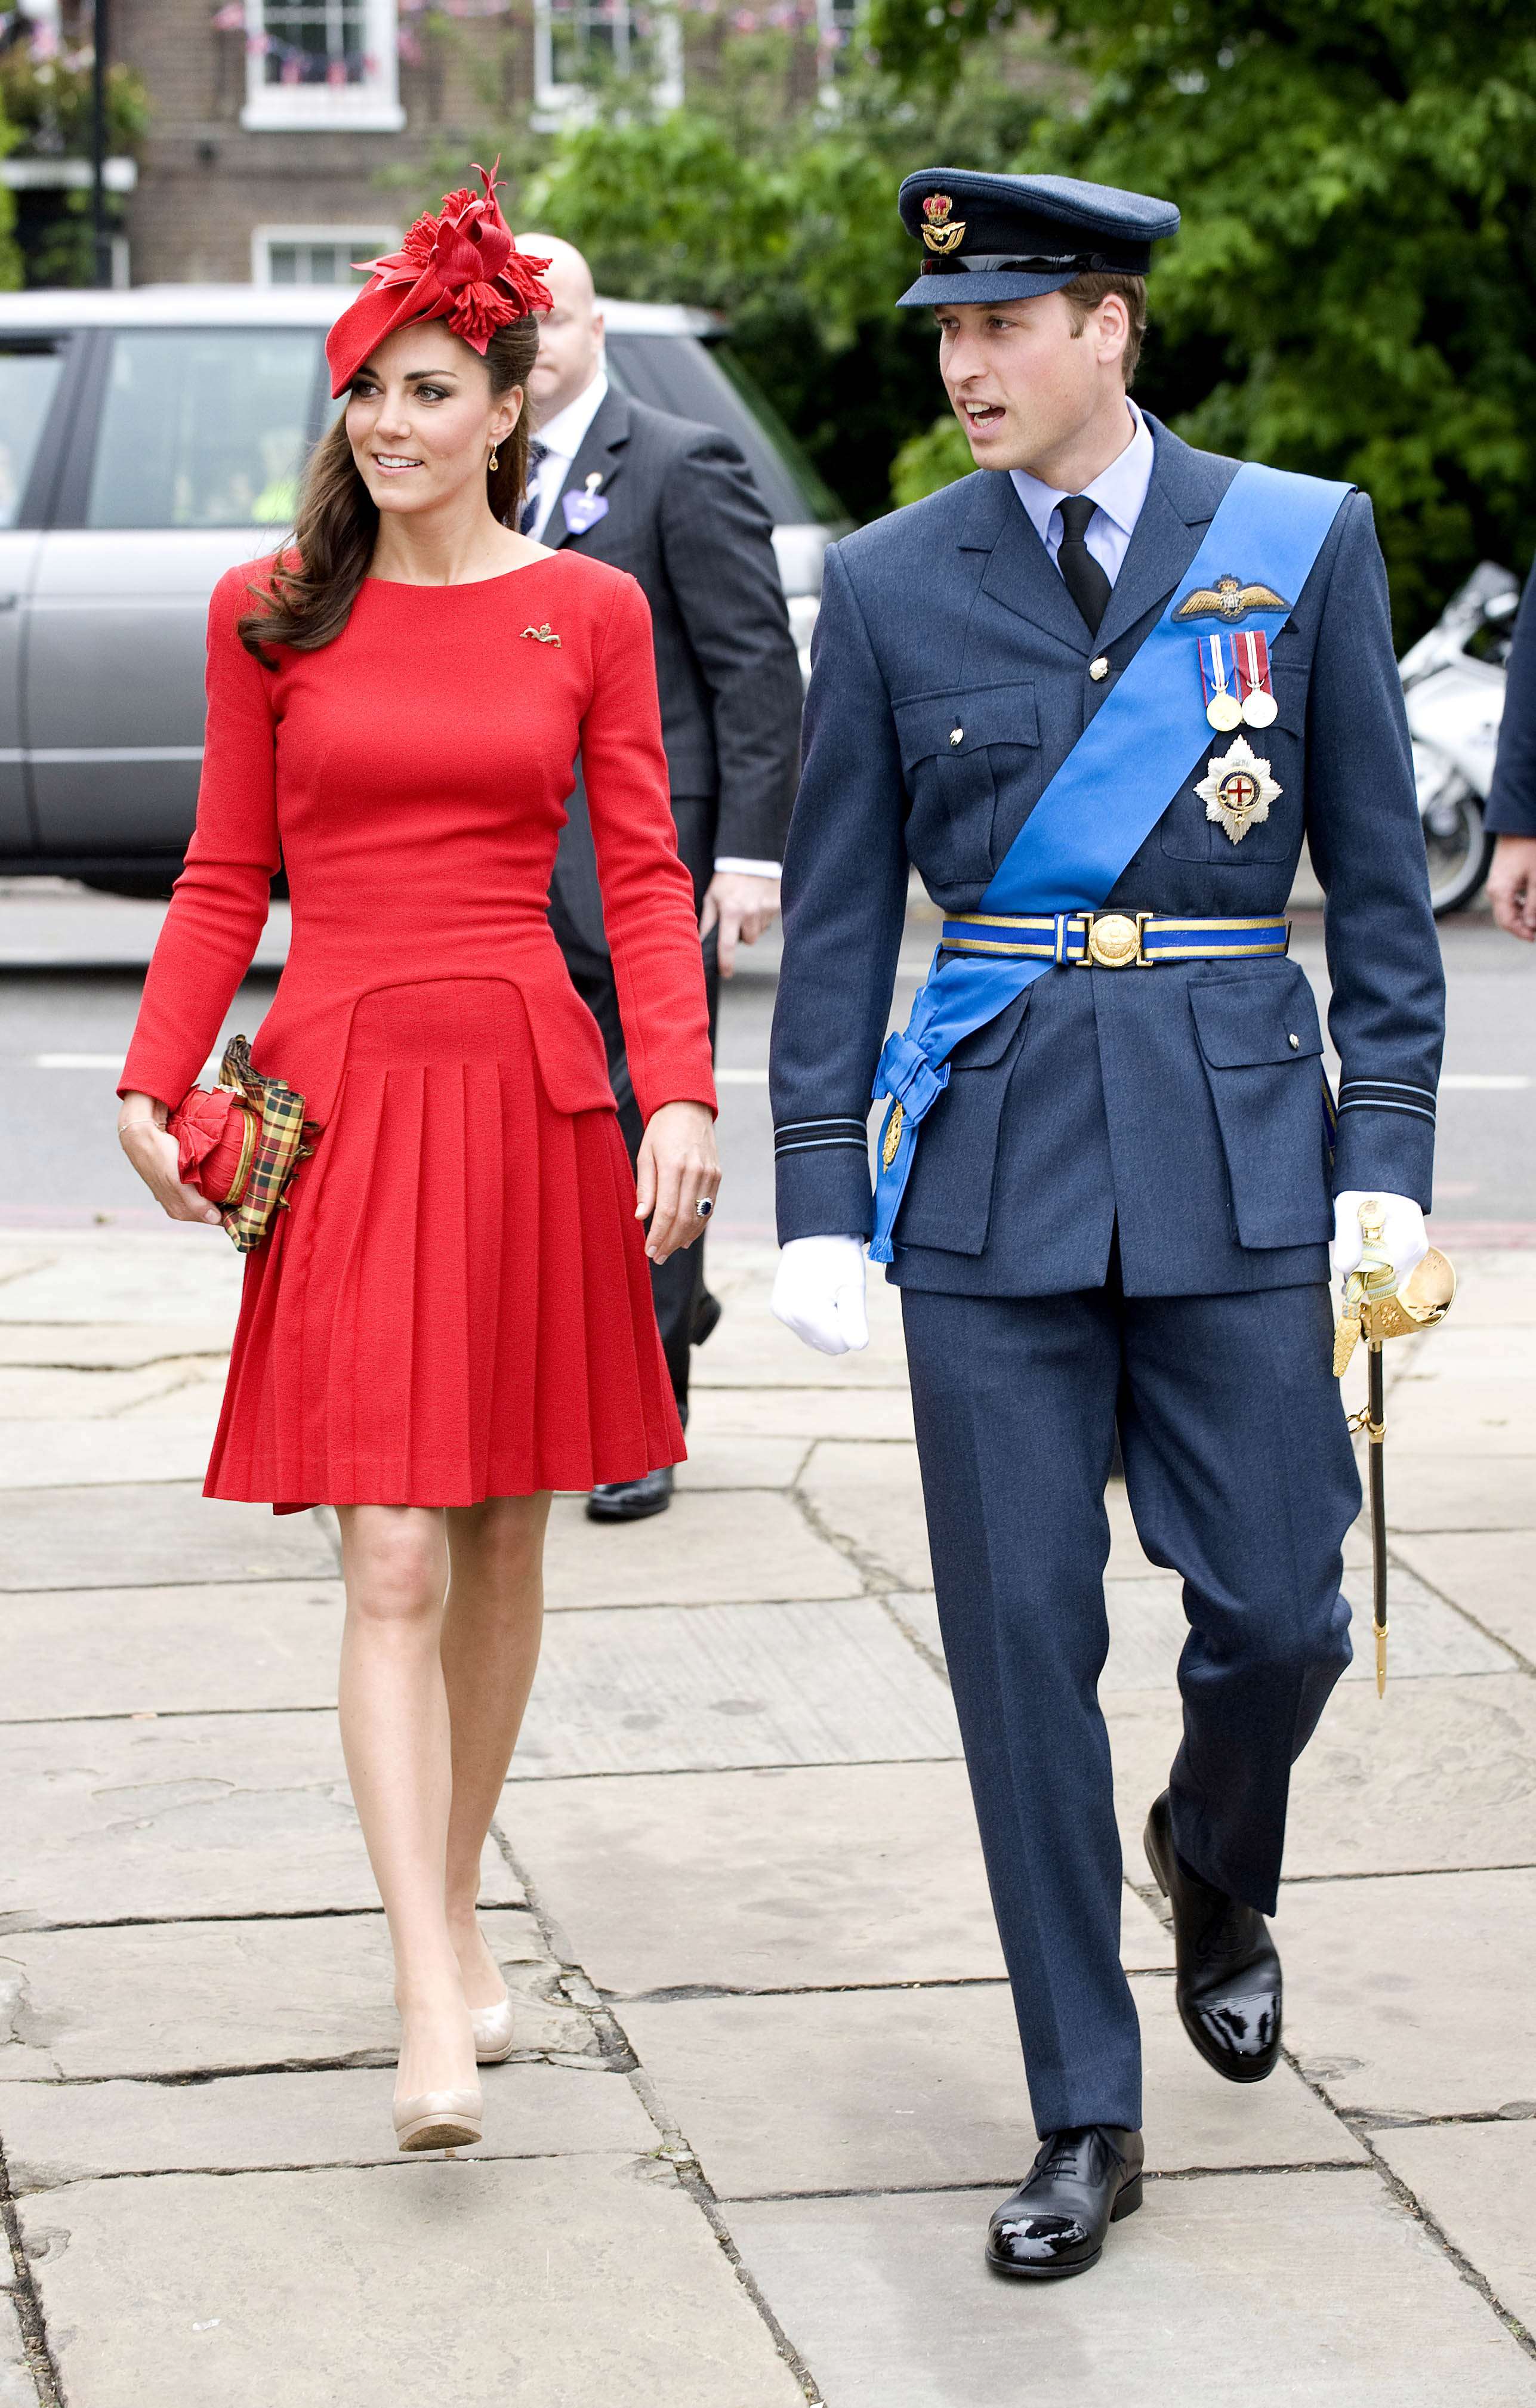 Sailing Sharp
                              On June 3, 2012, the Duchess sailed down London's Thames River for Queen Elizabeth II's Diamond Jubilee Pageant clad in a bold, tailored Alexander McQueen dress and adorned with a floral hat by Sylvia Fletcher for John Lock and Company. The dress and her clutch, also by McQueen, are customized for the Duchess on this occasion.